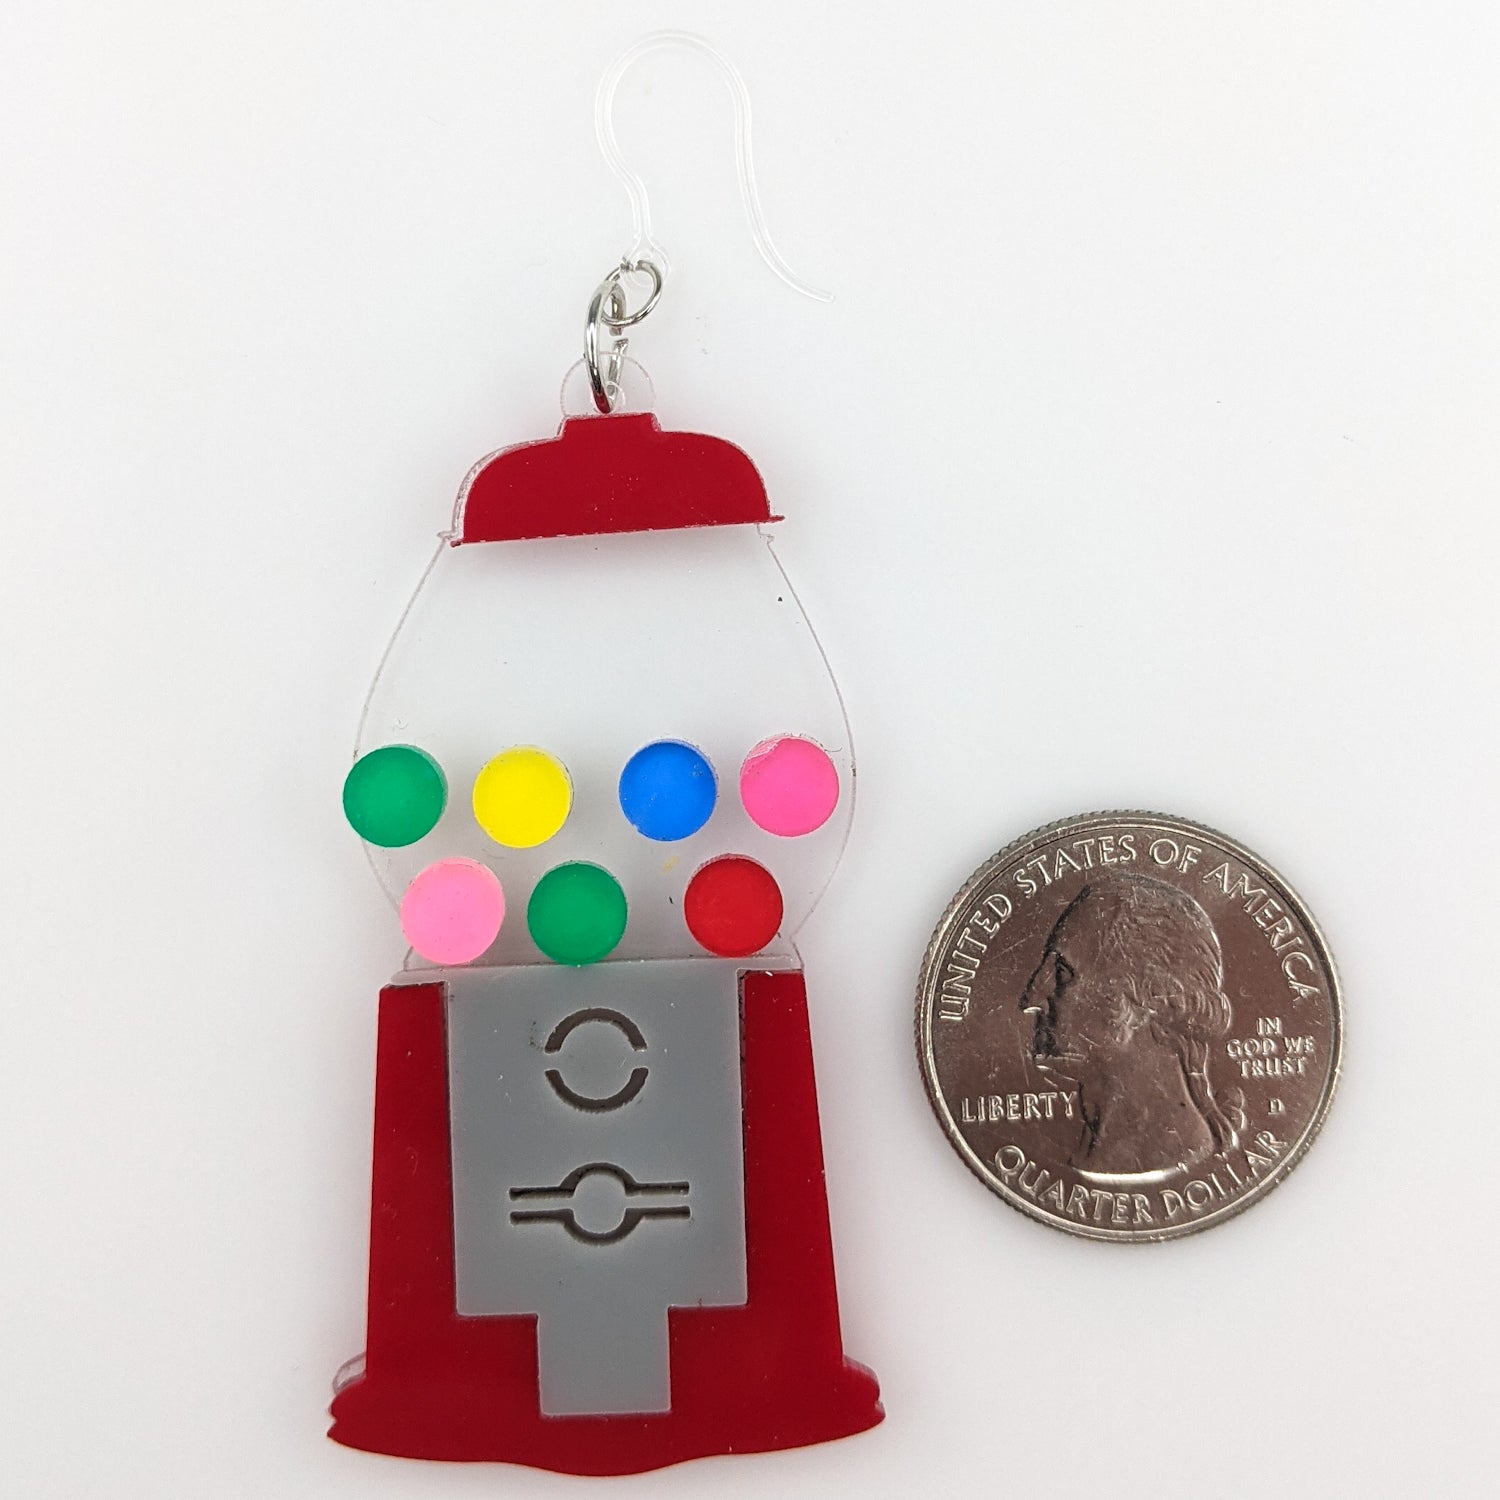 Exaggerated Gumball Machine Earrings (Dangles) - size comparison quarter